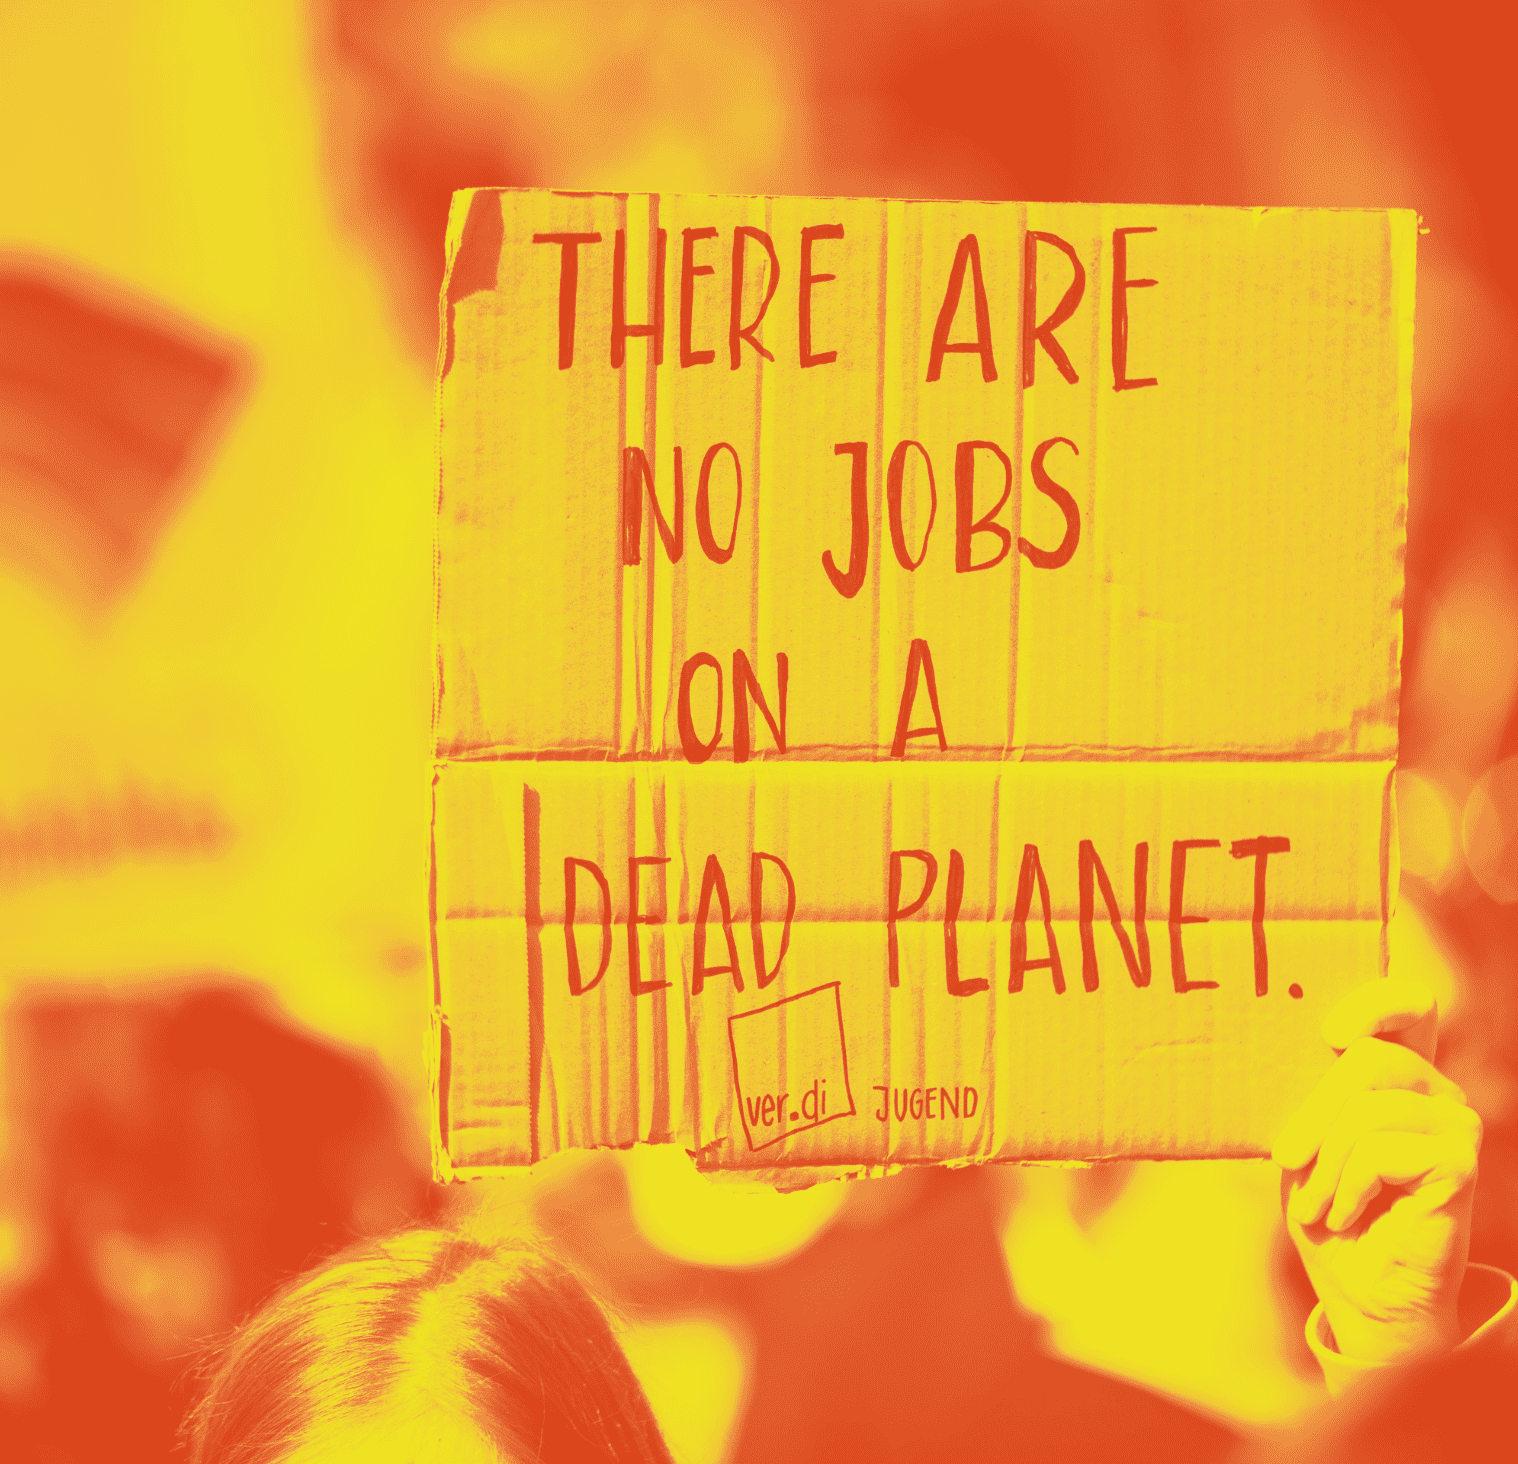 There are no jobs on a dead planet